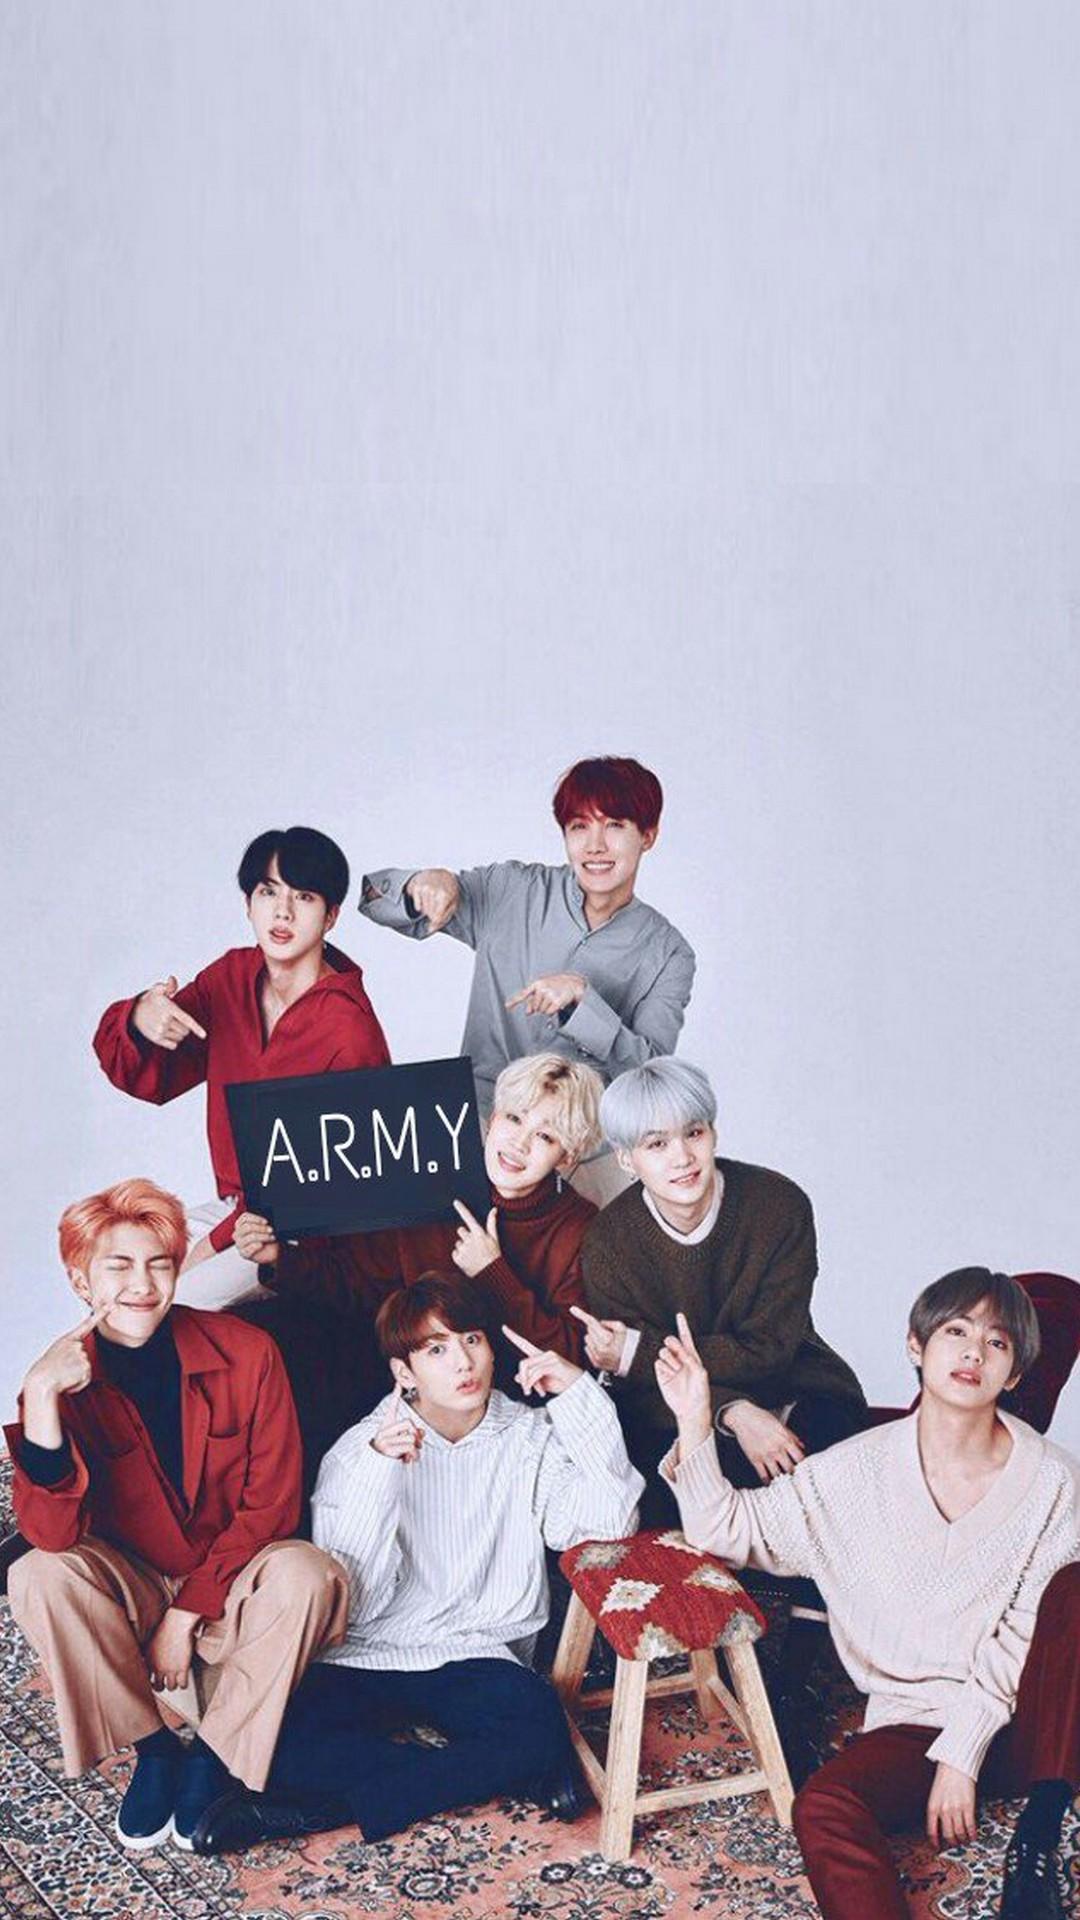 300+ Bts Wallpaper Hd For Iphone For FREE - MyWeb